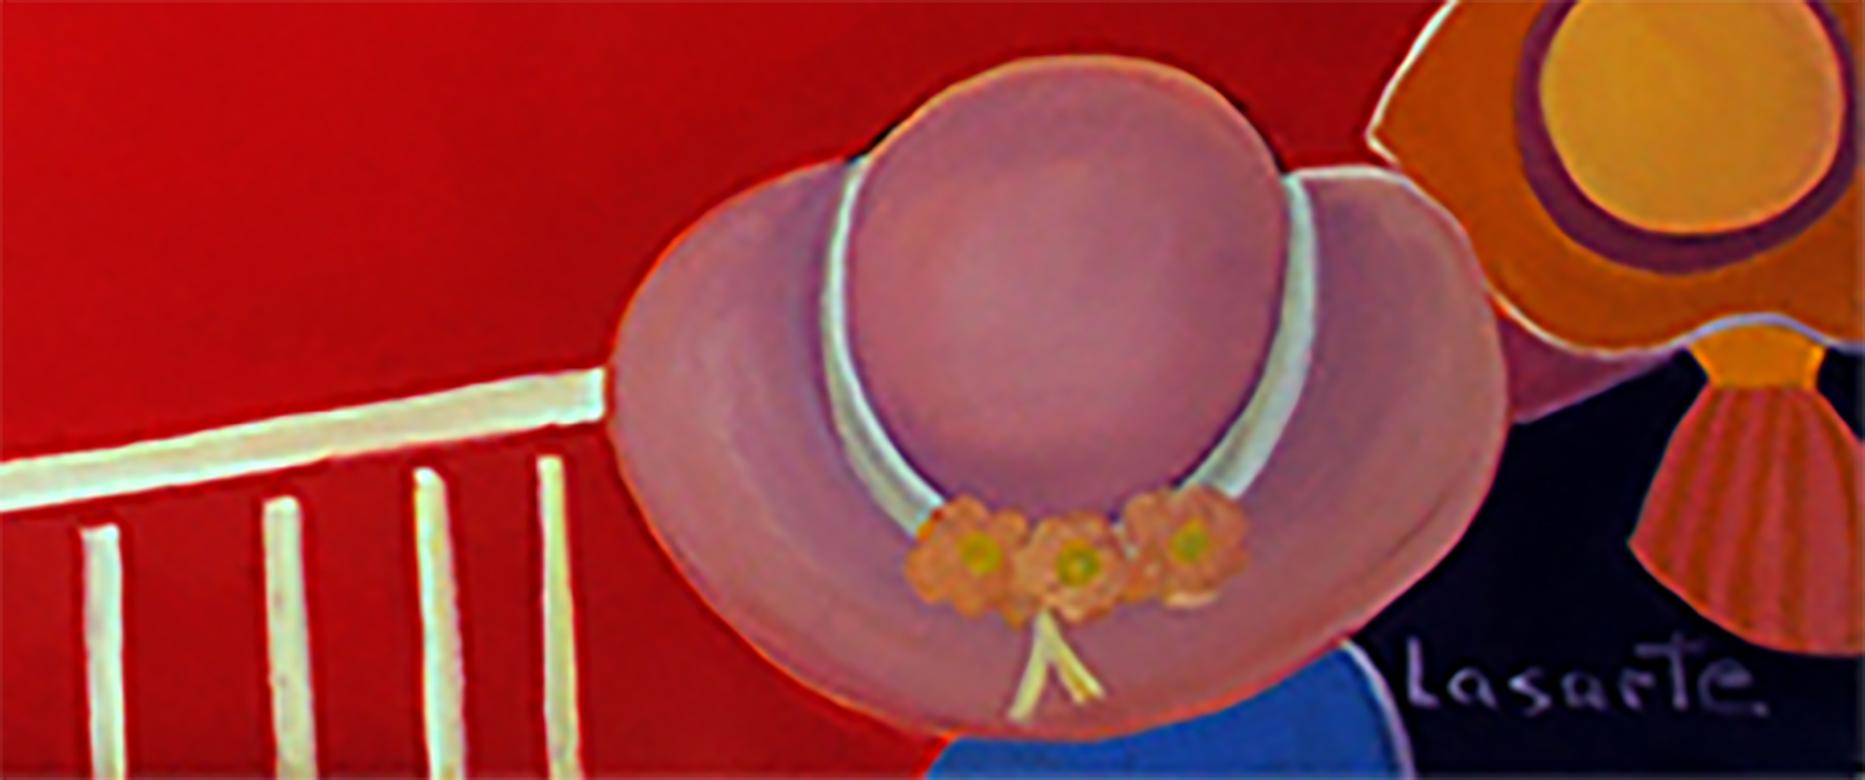 Red (Polo) by Mercedes Lasarte Oil on Canvas For Sale 1